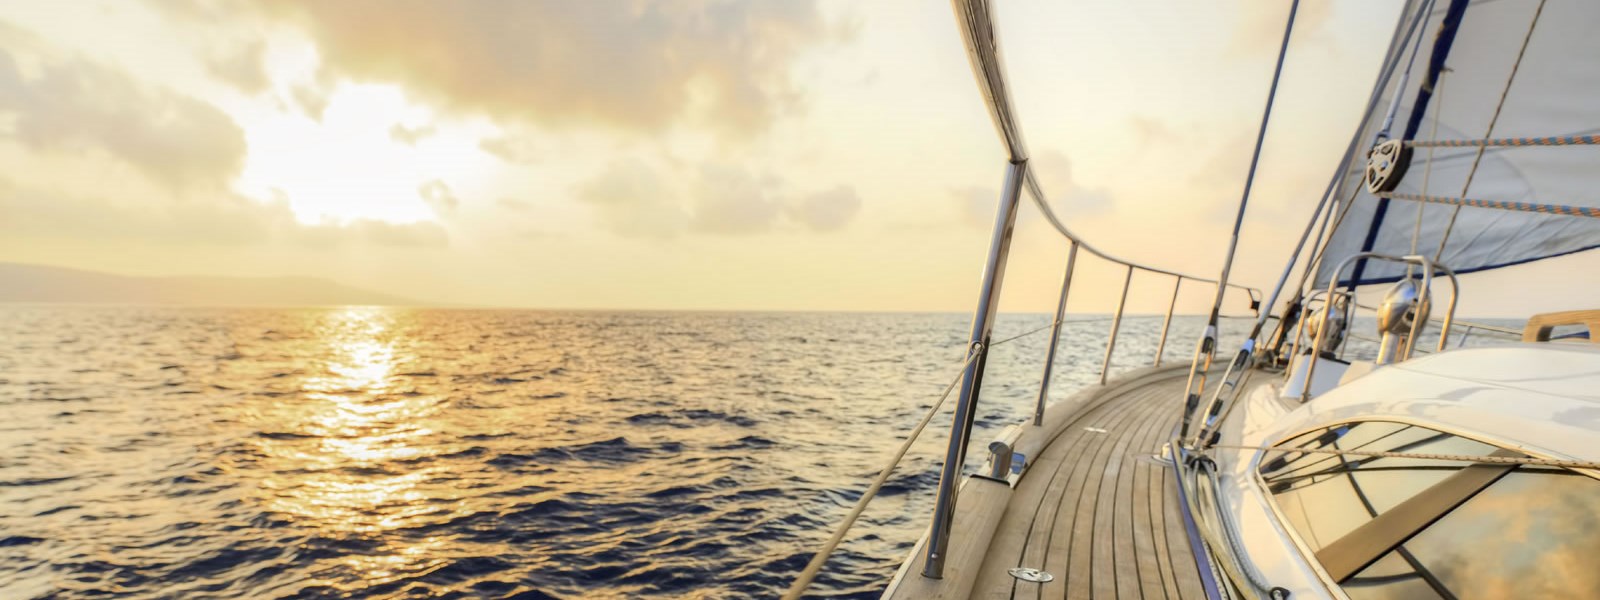  Personal Insurance Choose Sydney Charles for plain sailing personal insurance provision.